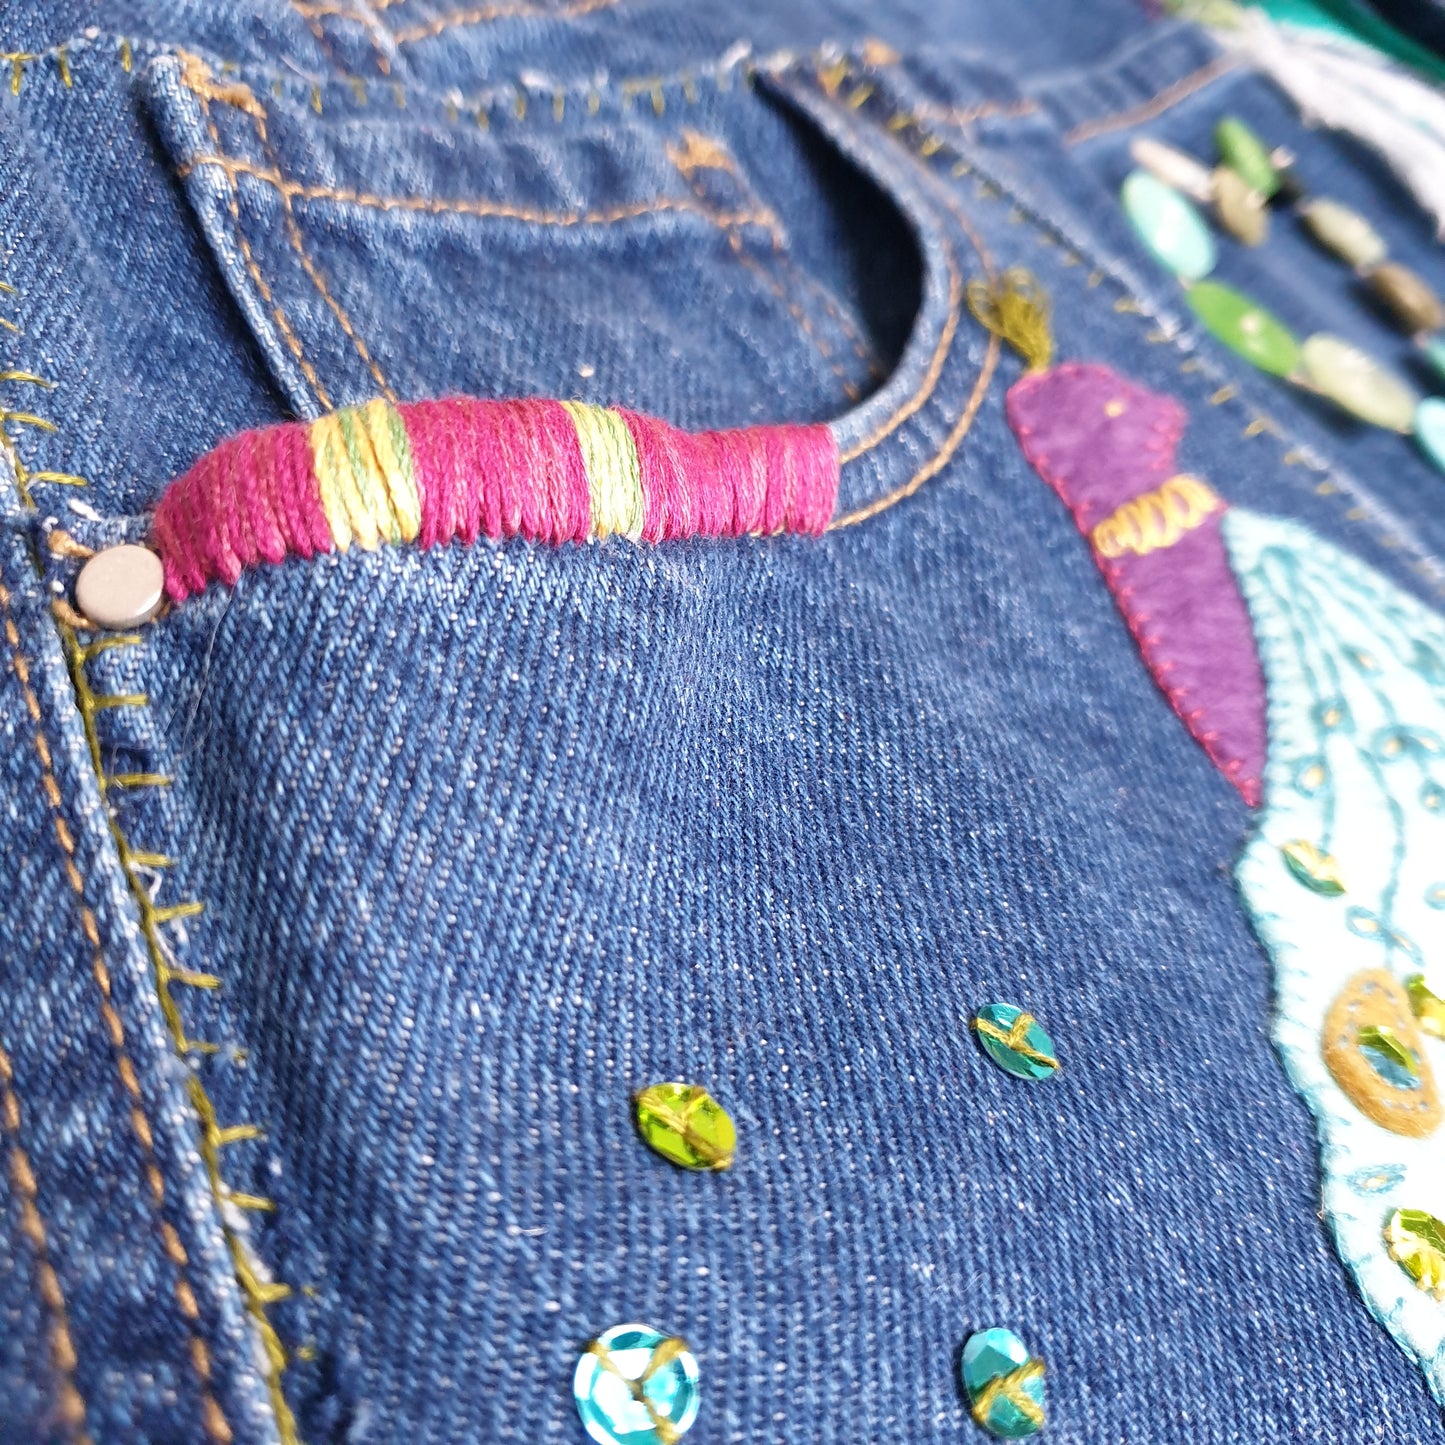 Upcycled Denim Craft Apron: #peaceandcraft Workshop Project 2020